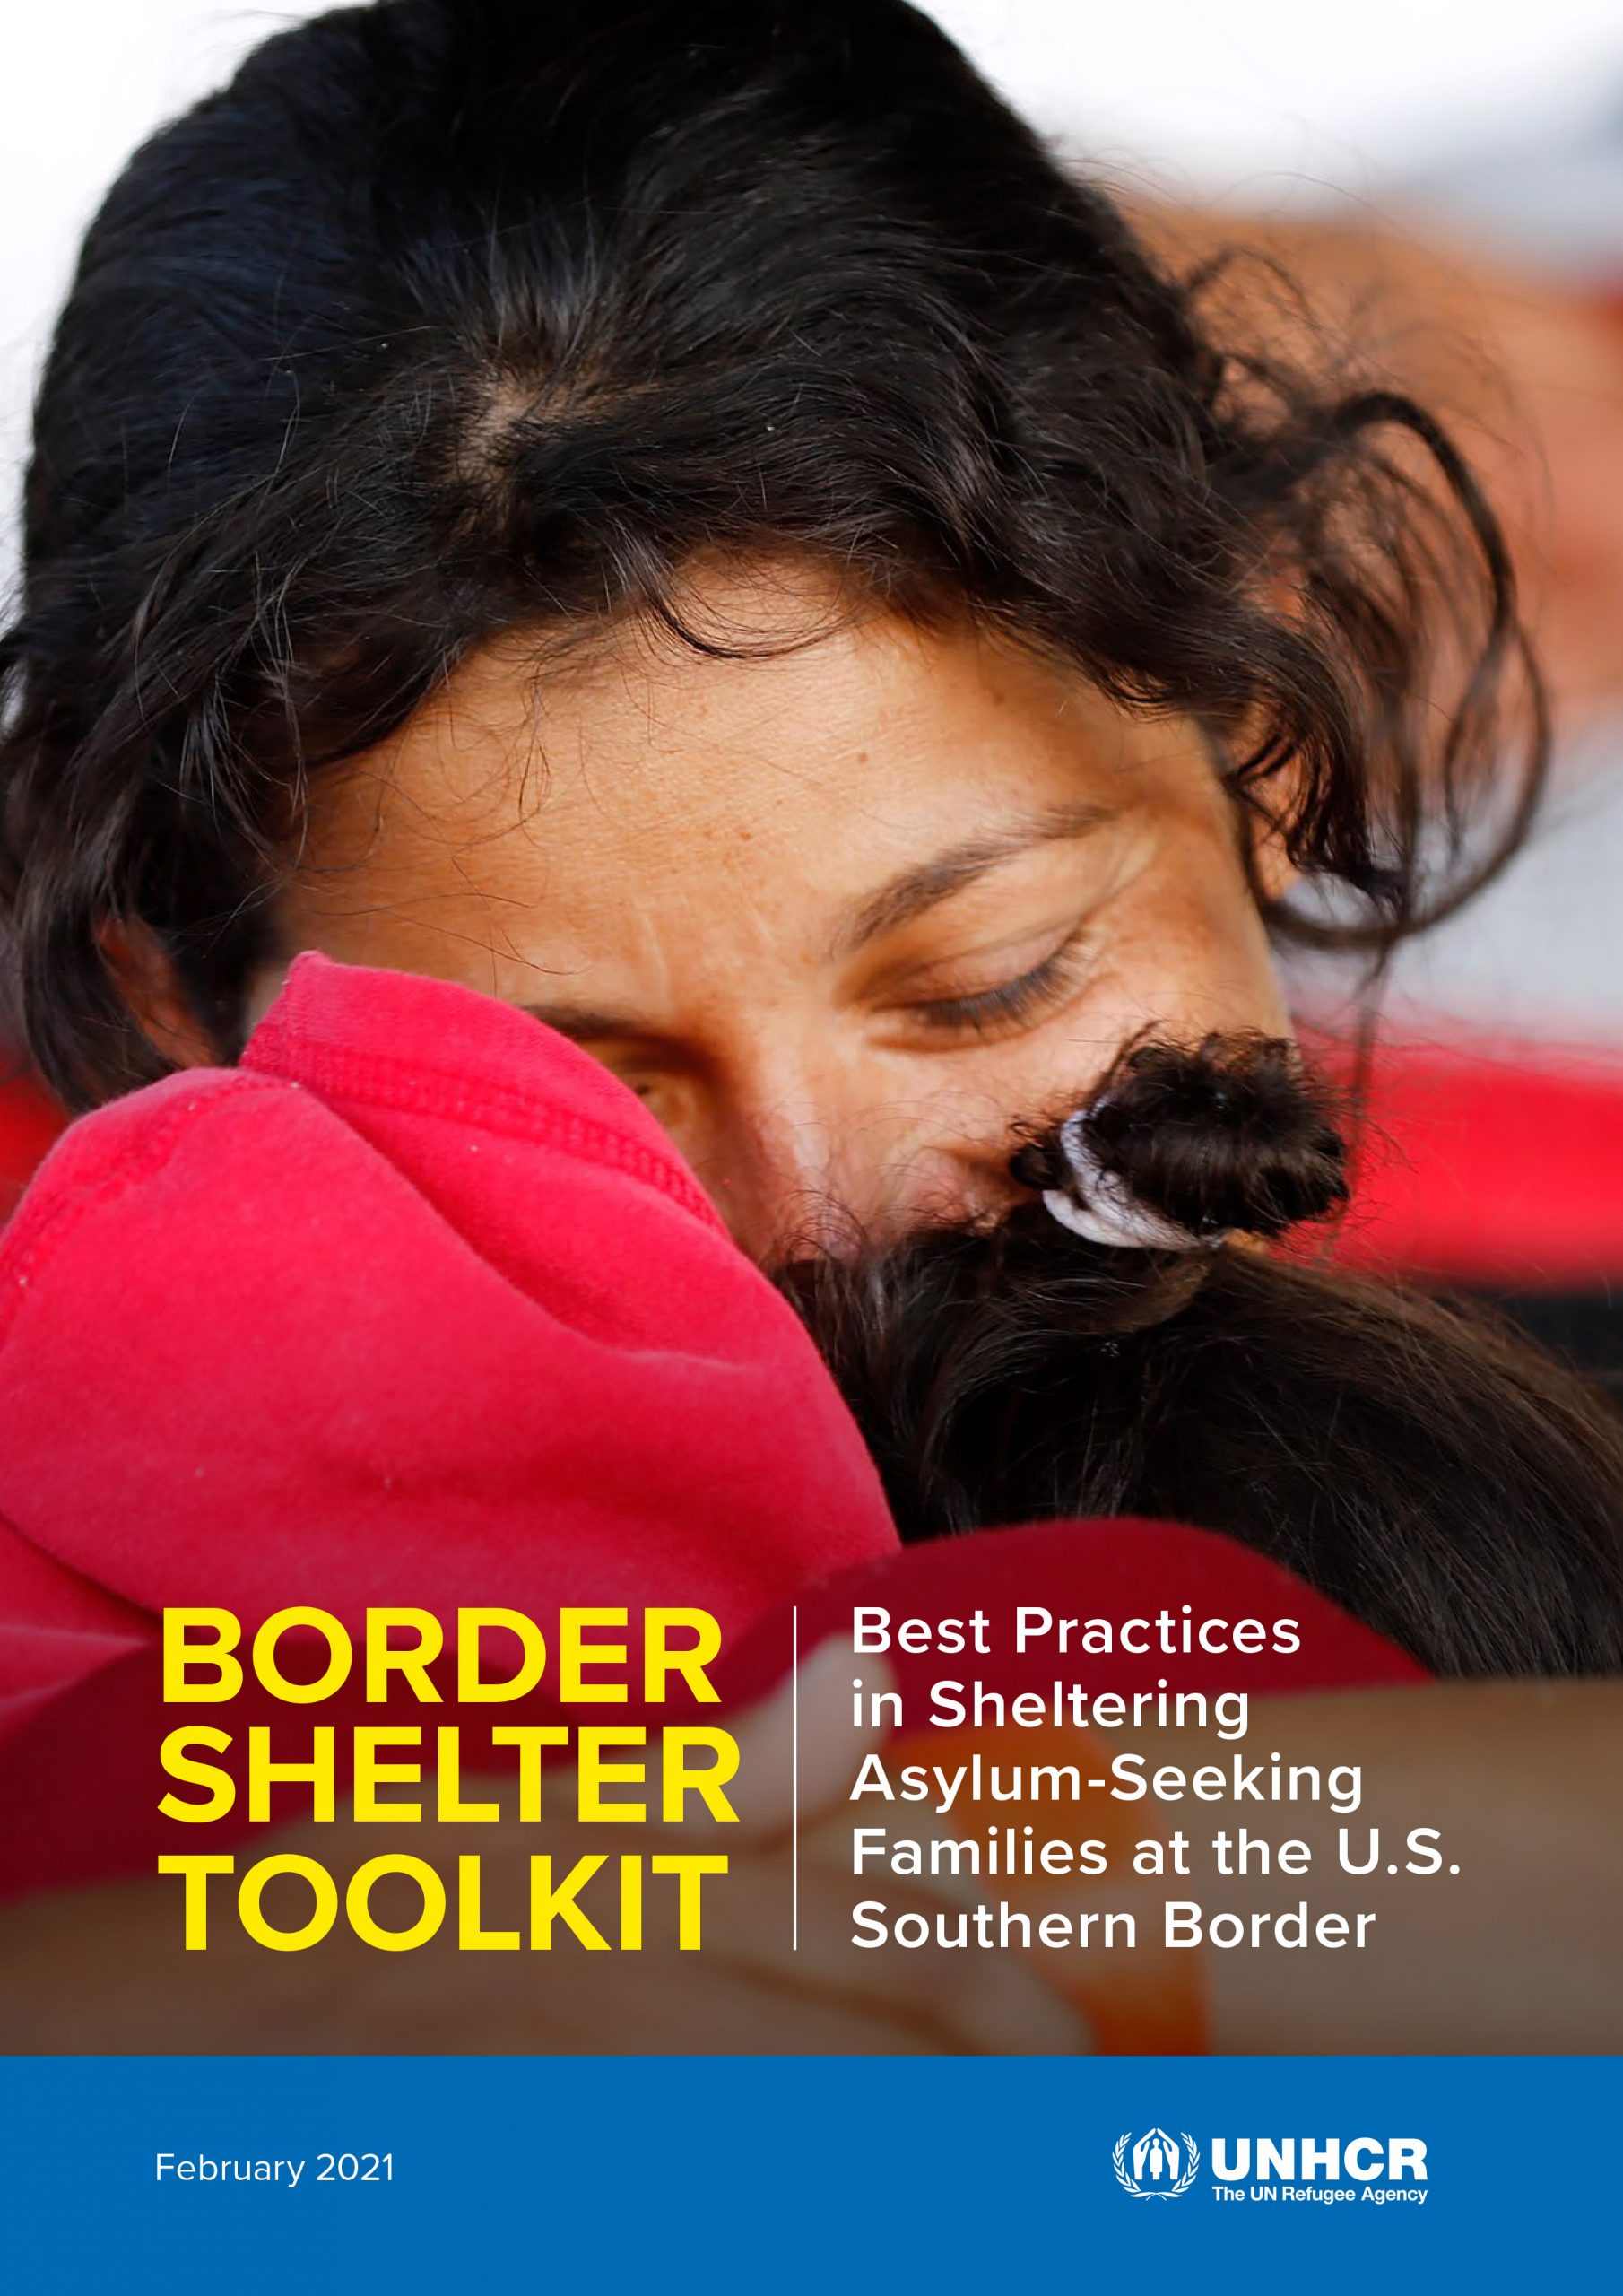 Toolkit cover showing woman hugging child